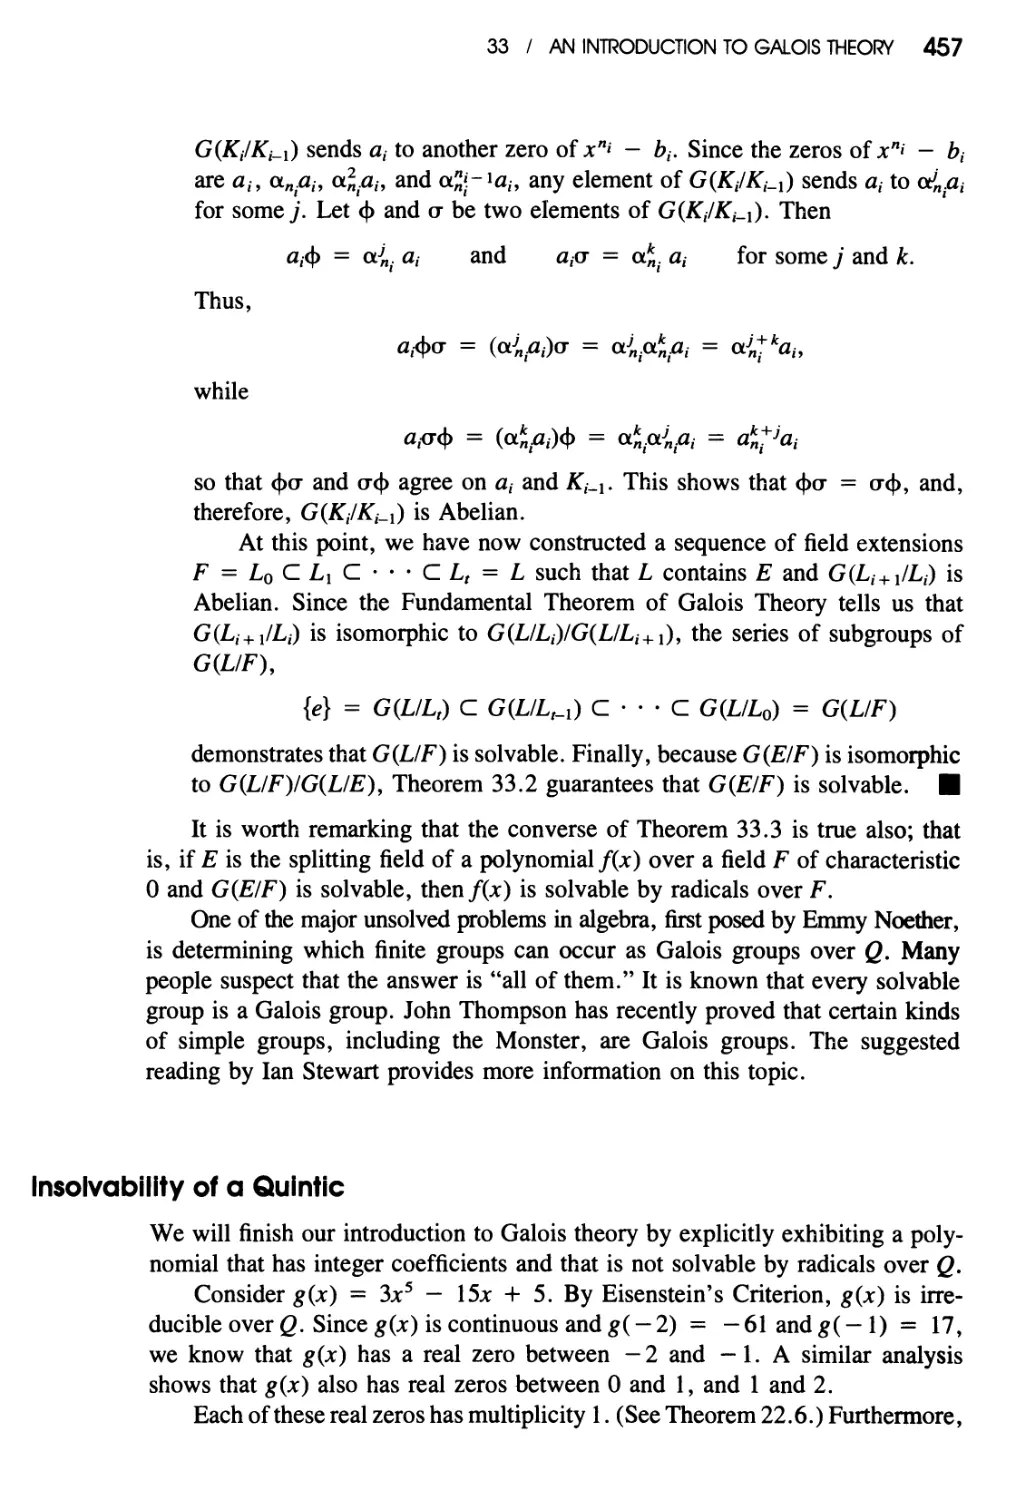 Insolvability of a Quintic